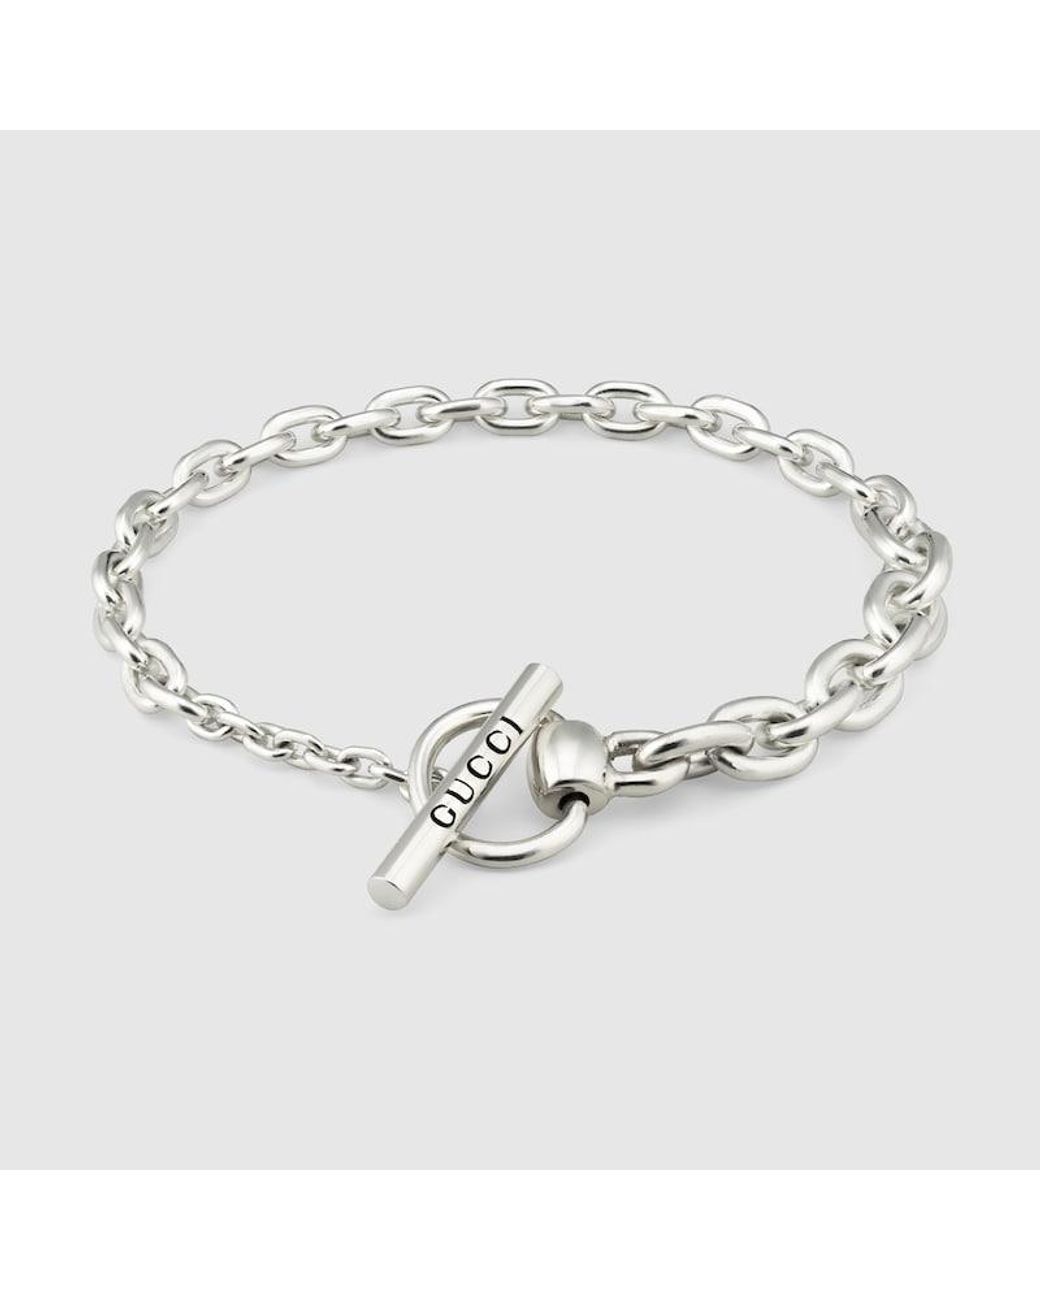 Sold at Auction: A sterling silver bracelet, Gucci, Horsebit